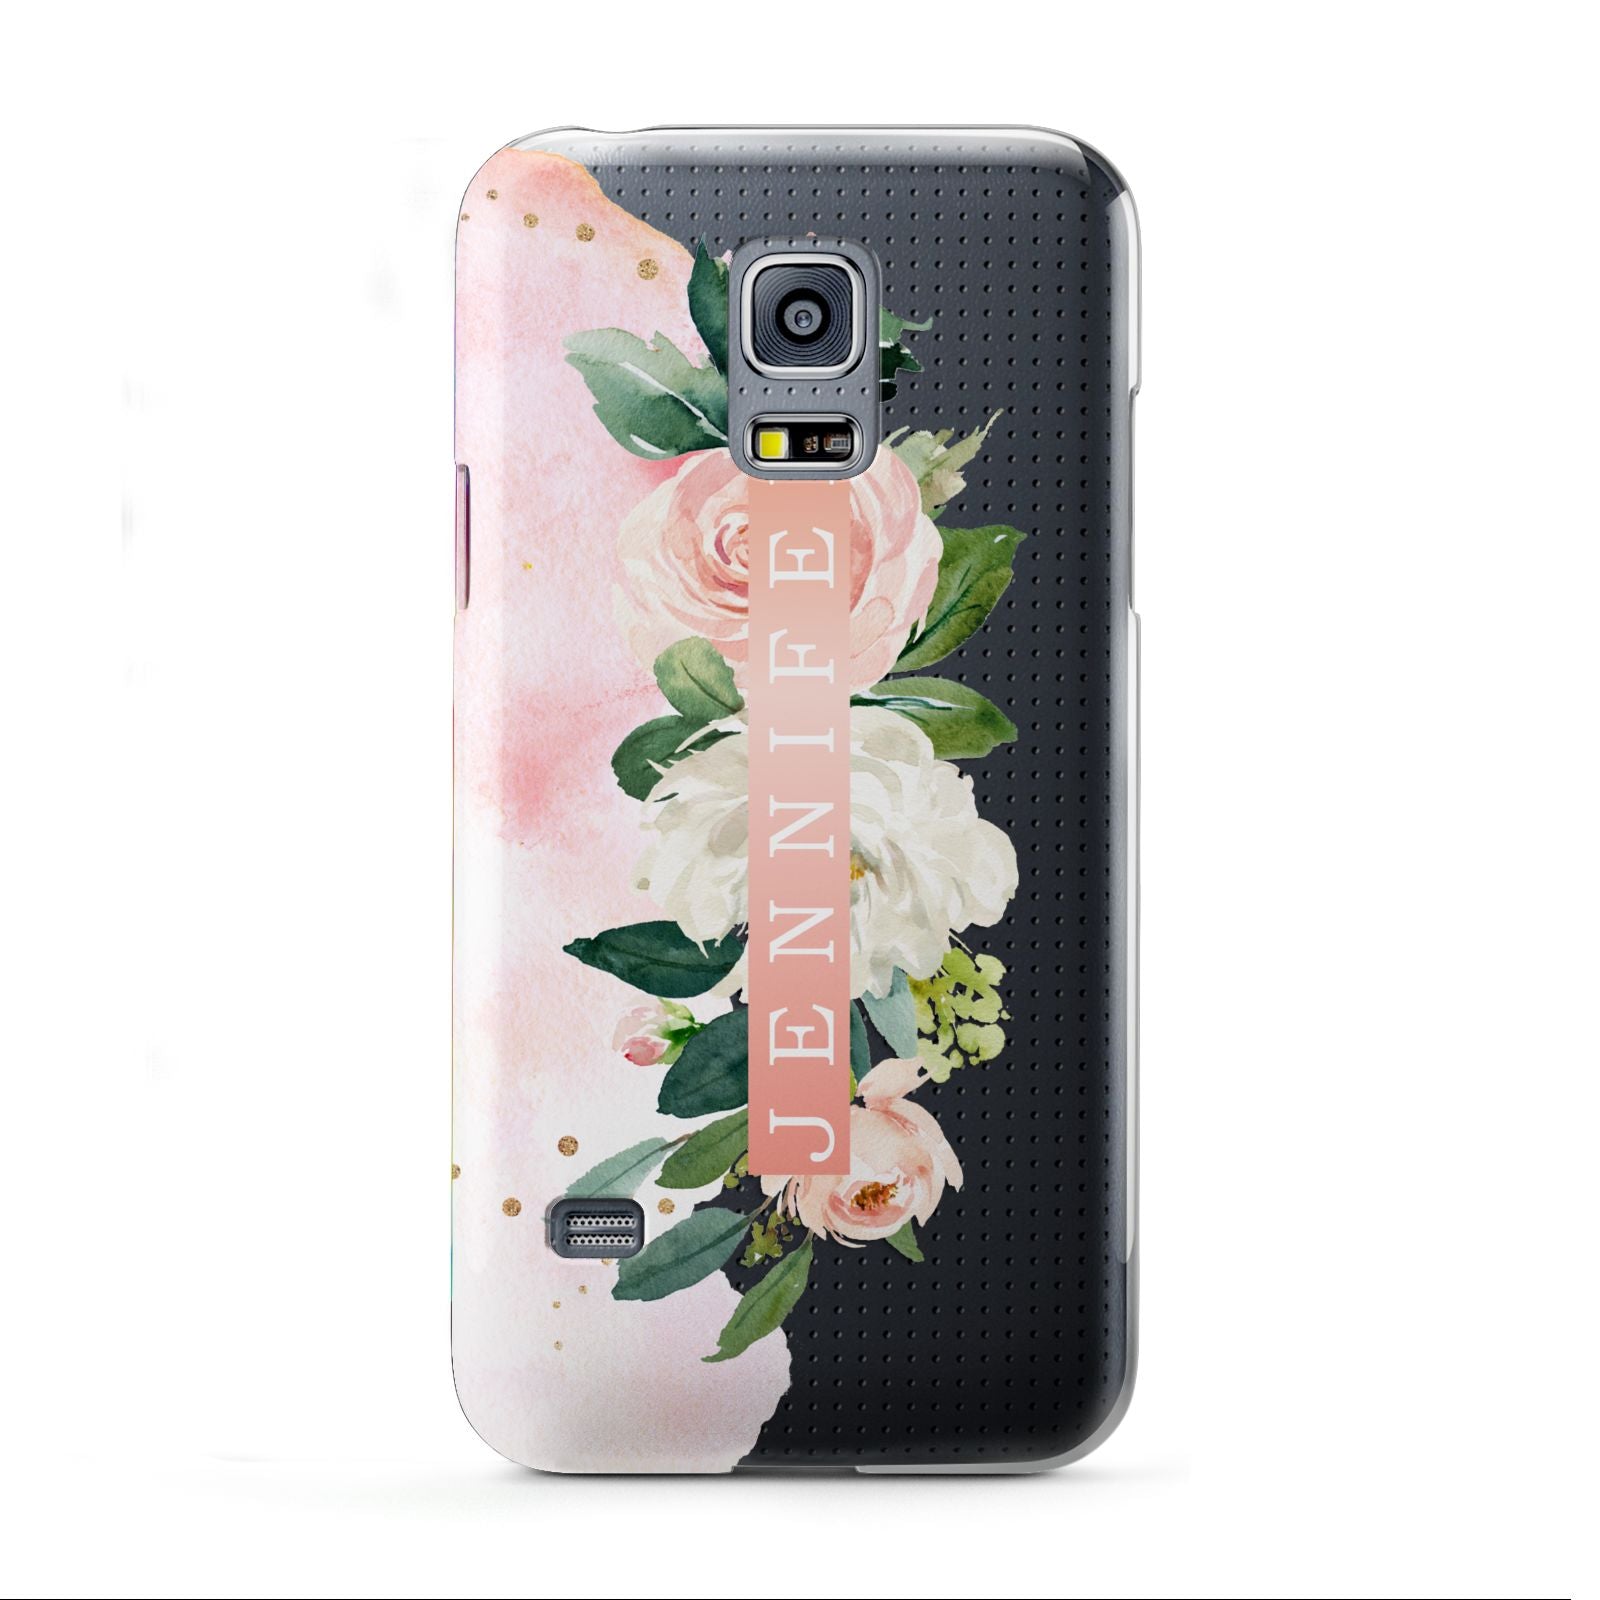 Blush Pink Personalised Name Floral Samsung Galaxy S5 Mini Case